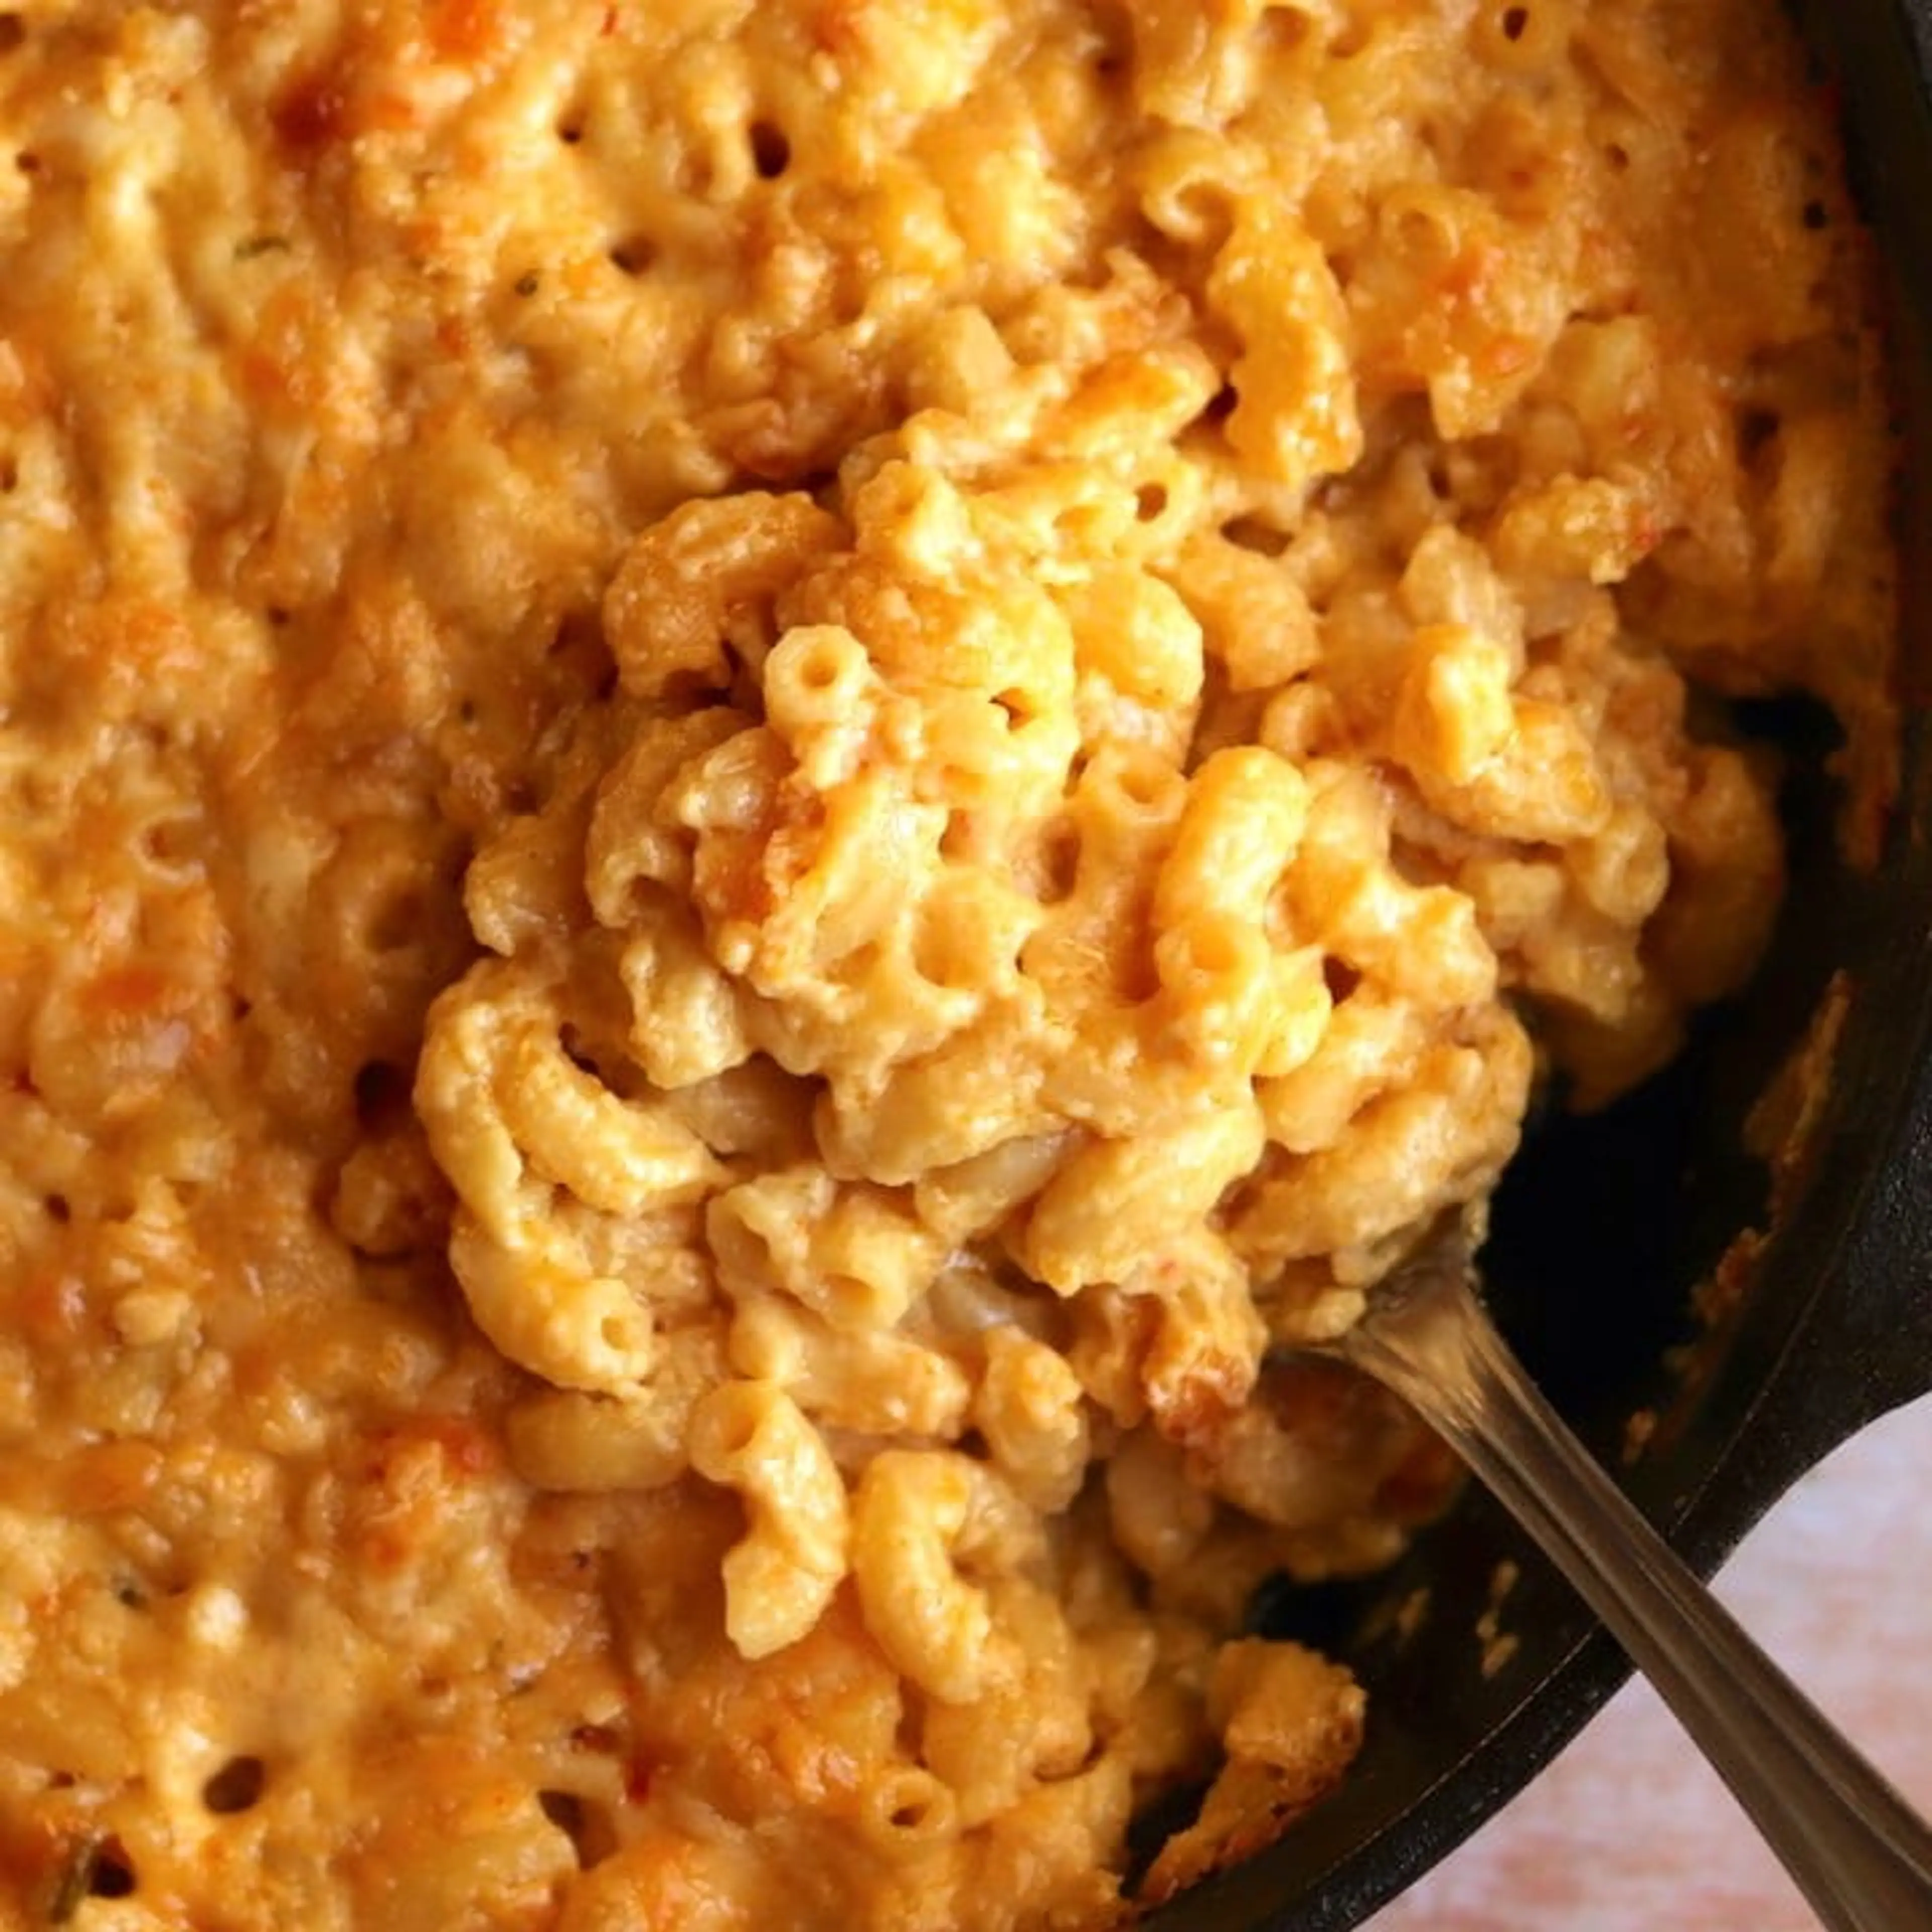 Spicy Baked Macaroni and Cheese